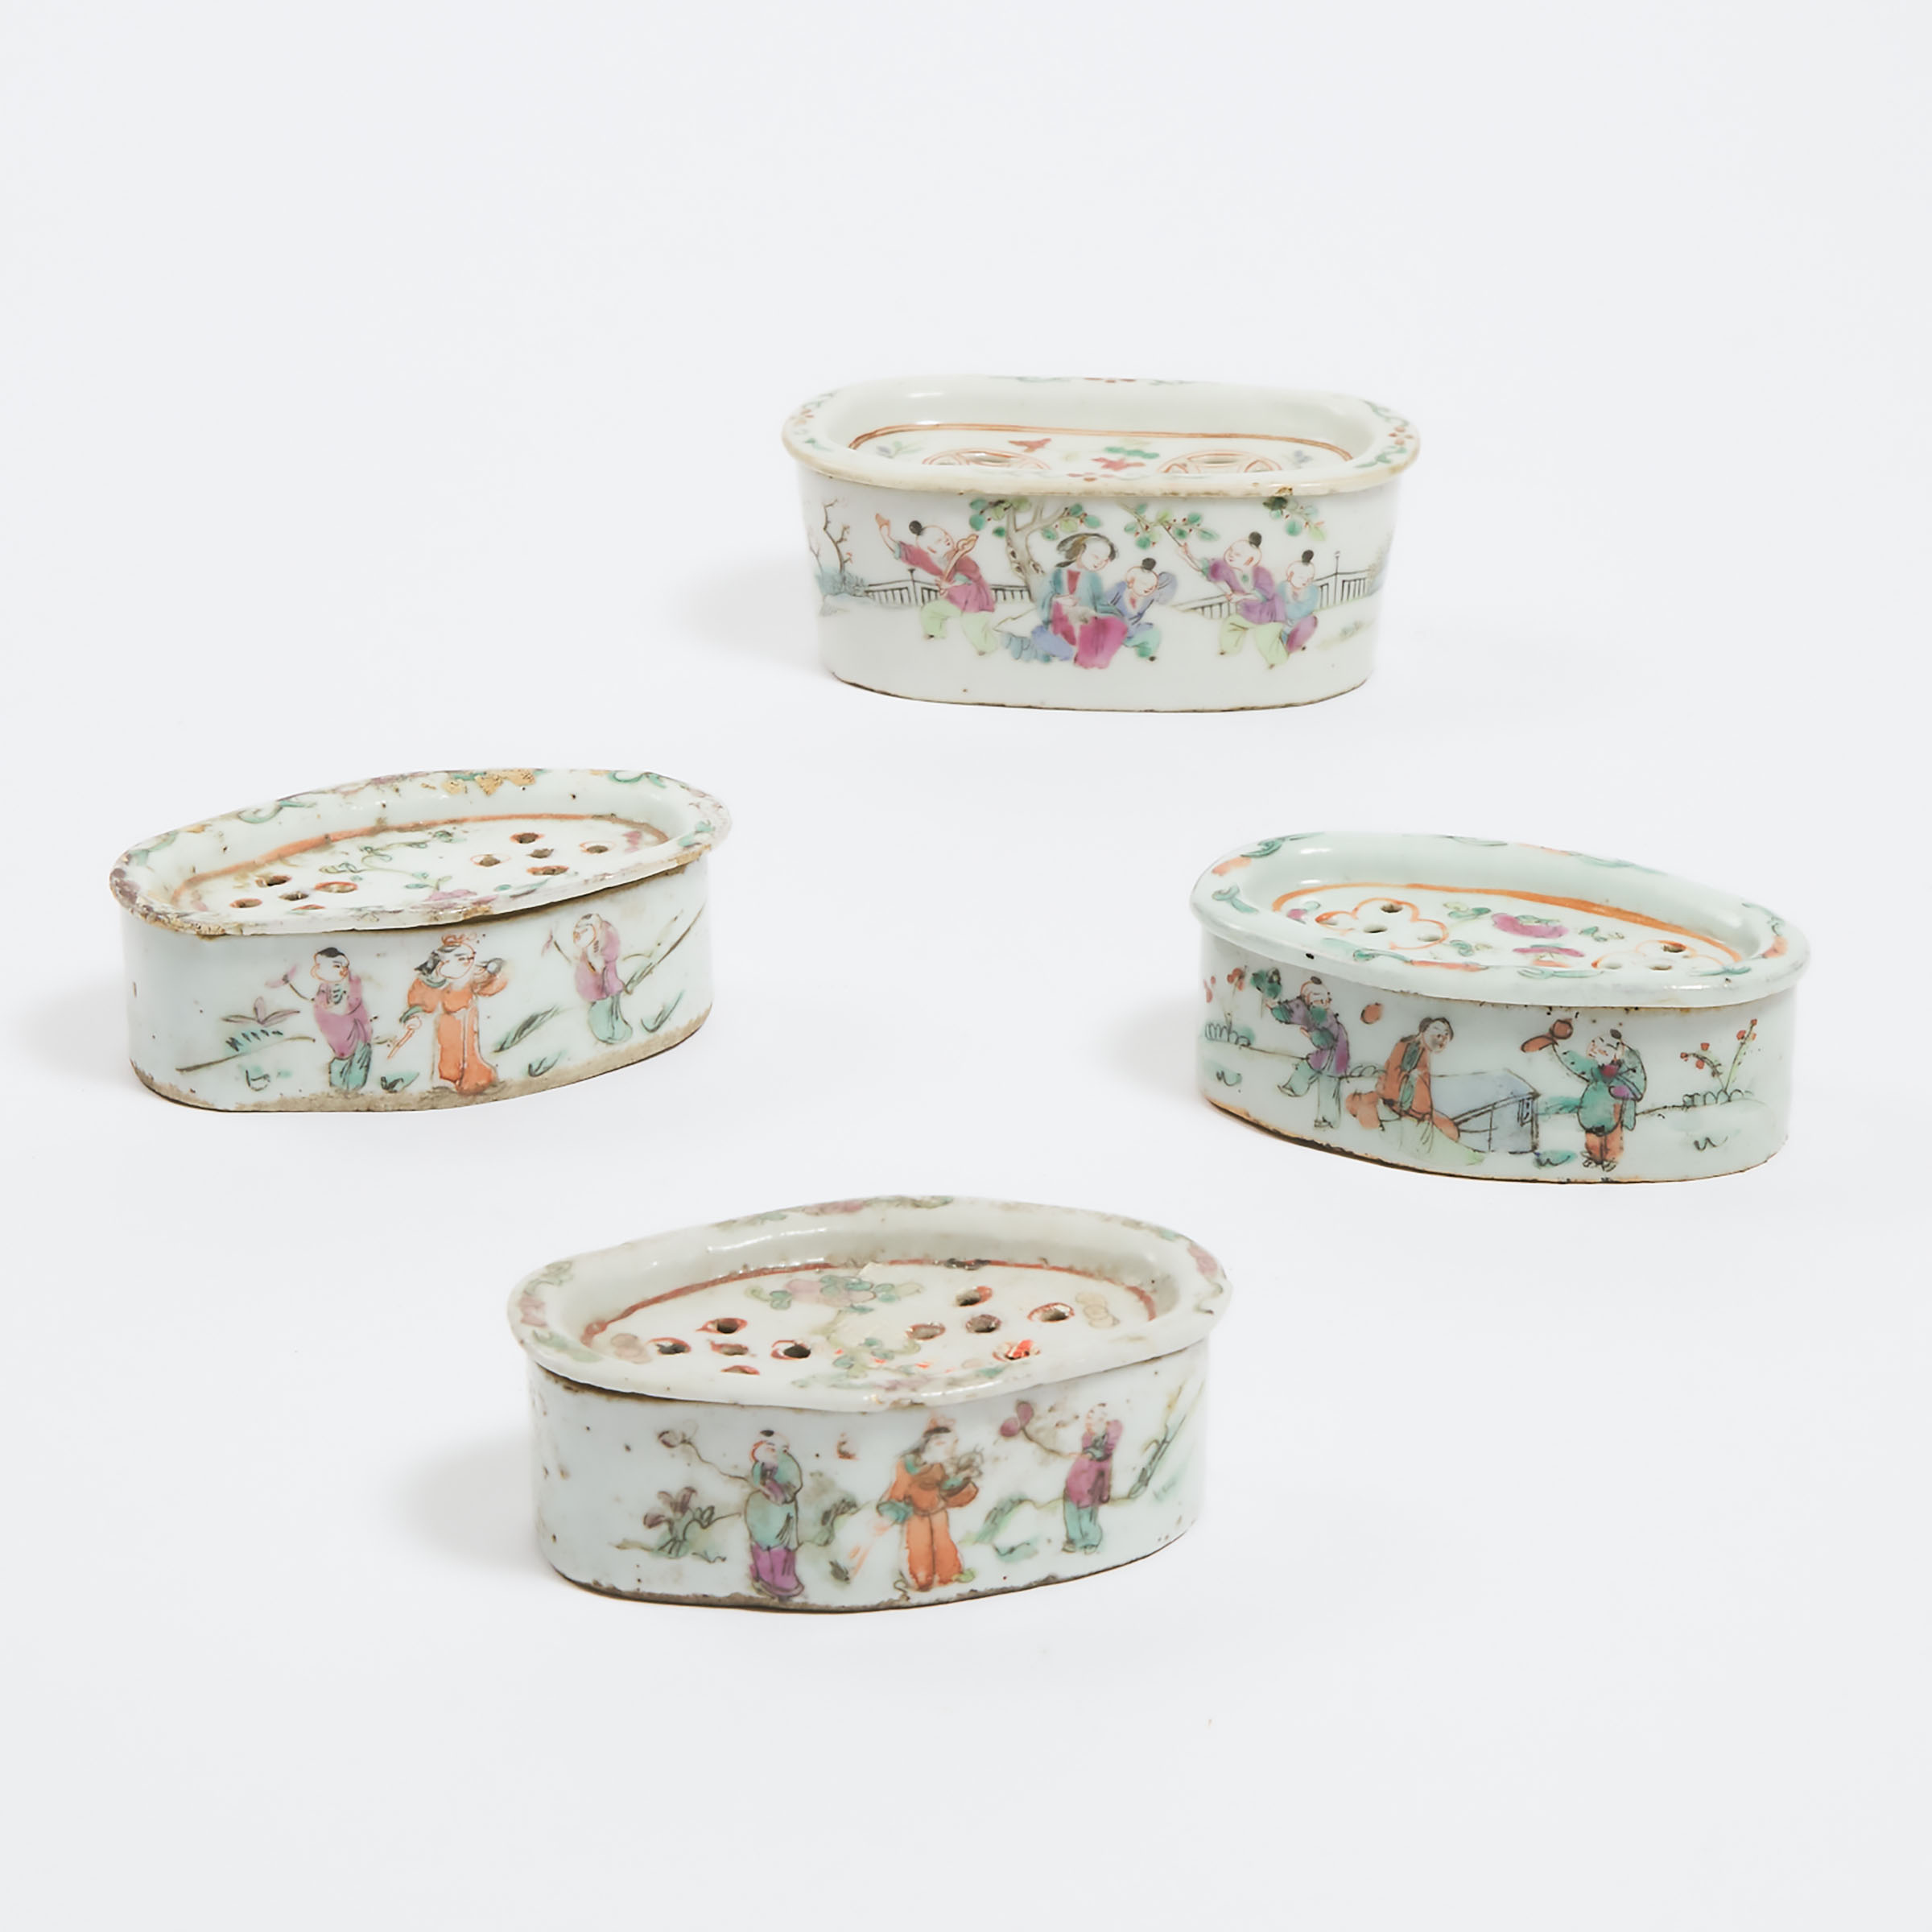 A Group of Four Famille Rose Lidded Boxes, Late Qing/Republican Period